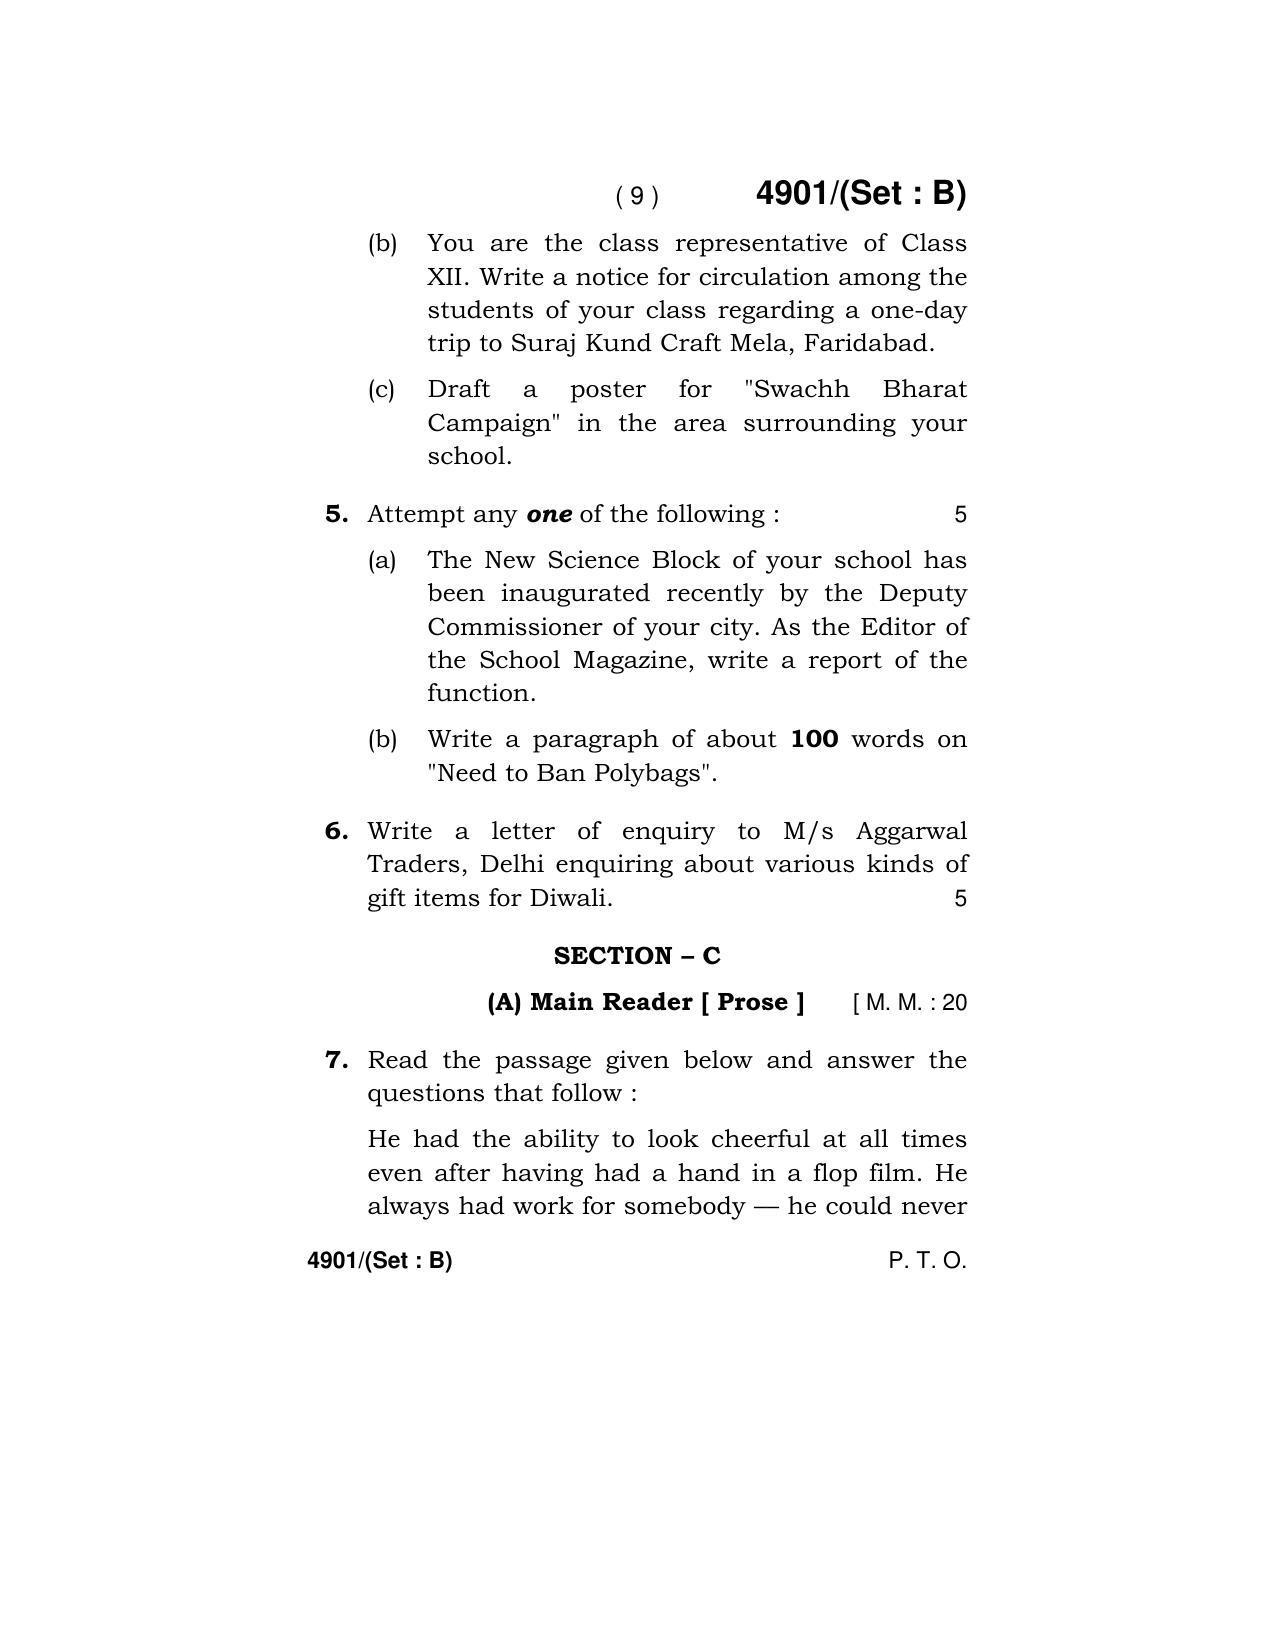 Haryana Board HBSE Class 12 English Core 2020 Question Paper - Page 25